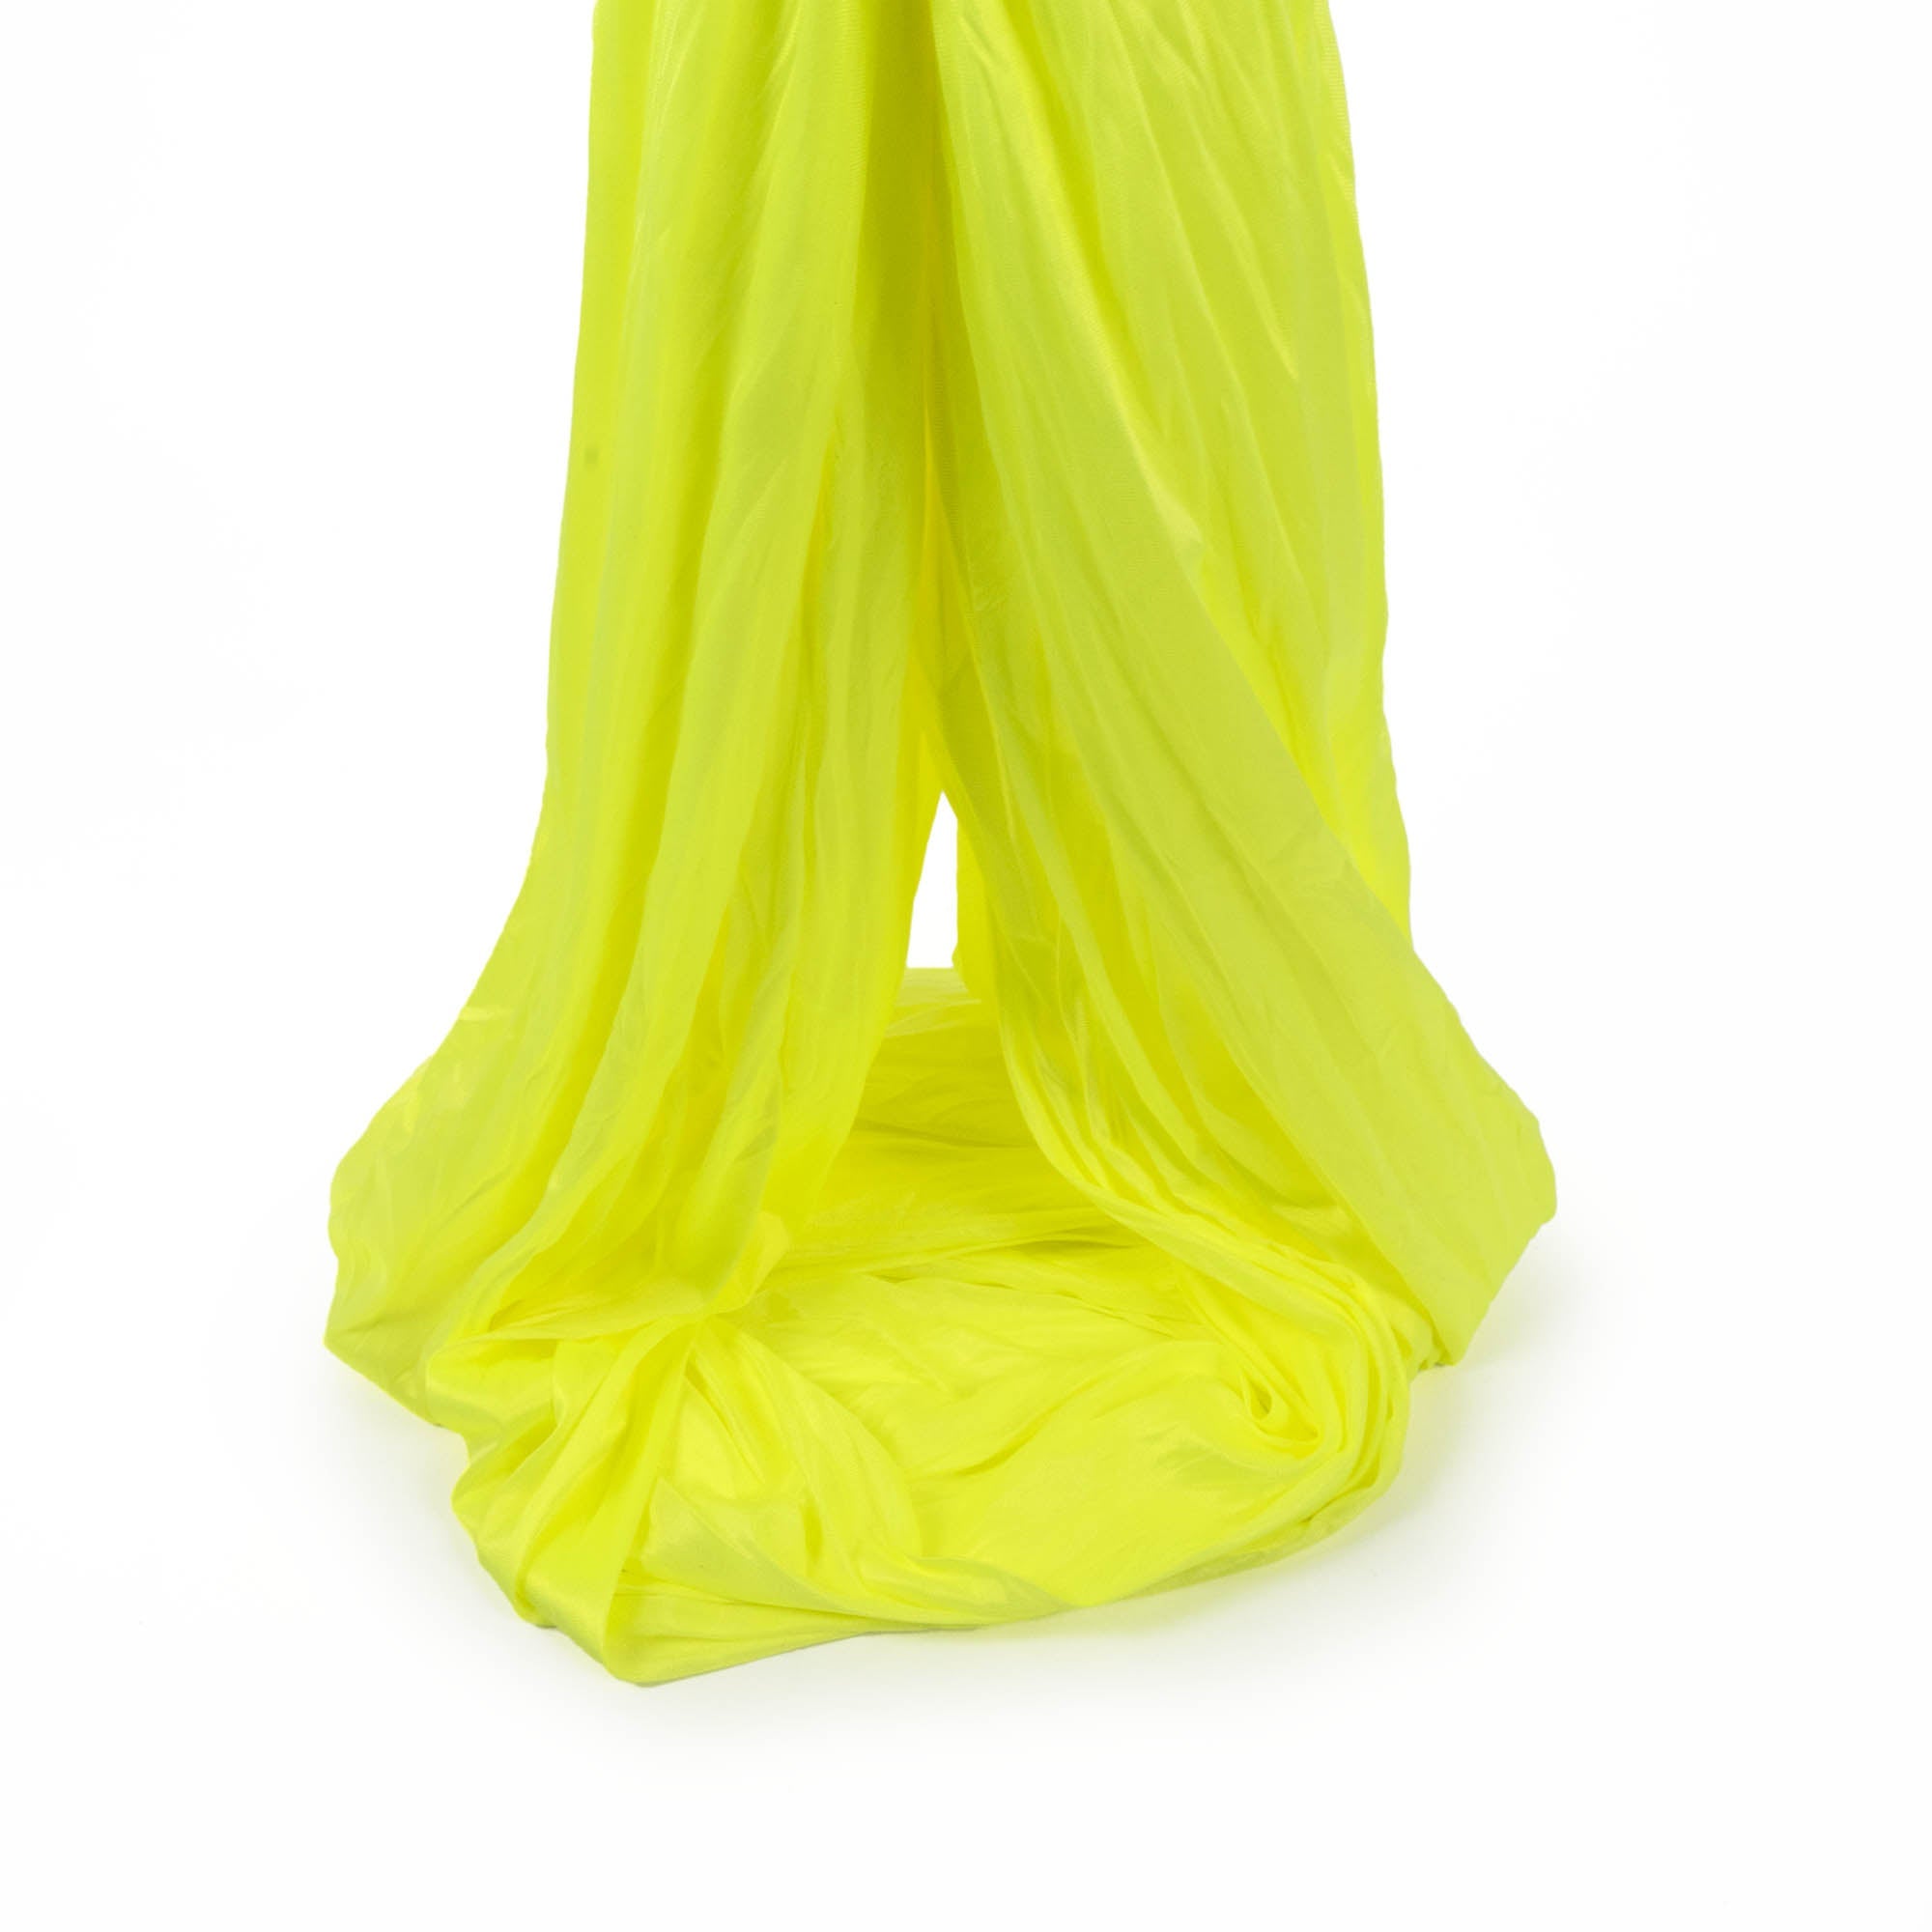 Prodigy 6m aerial yoga hammock piled up in neon yellow